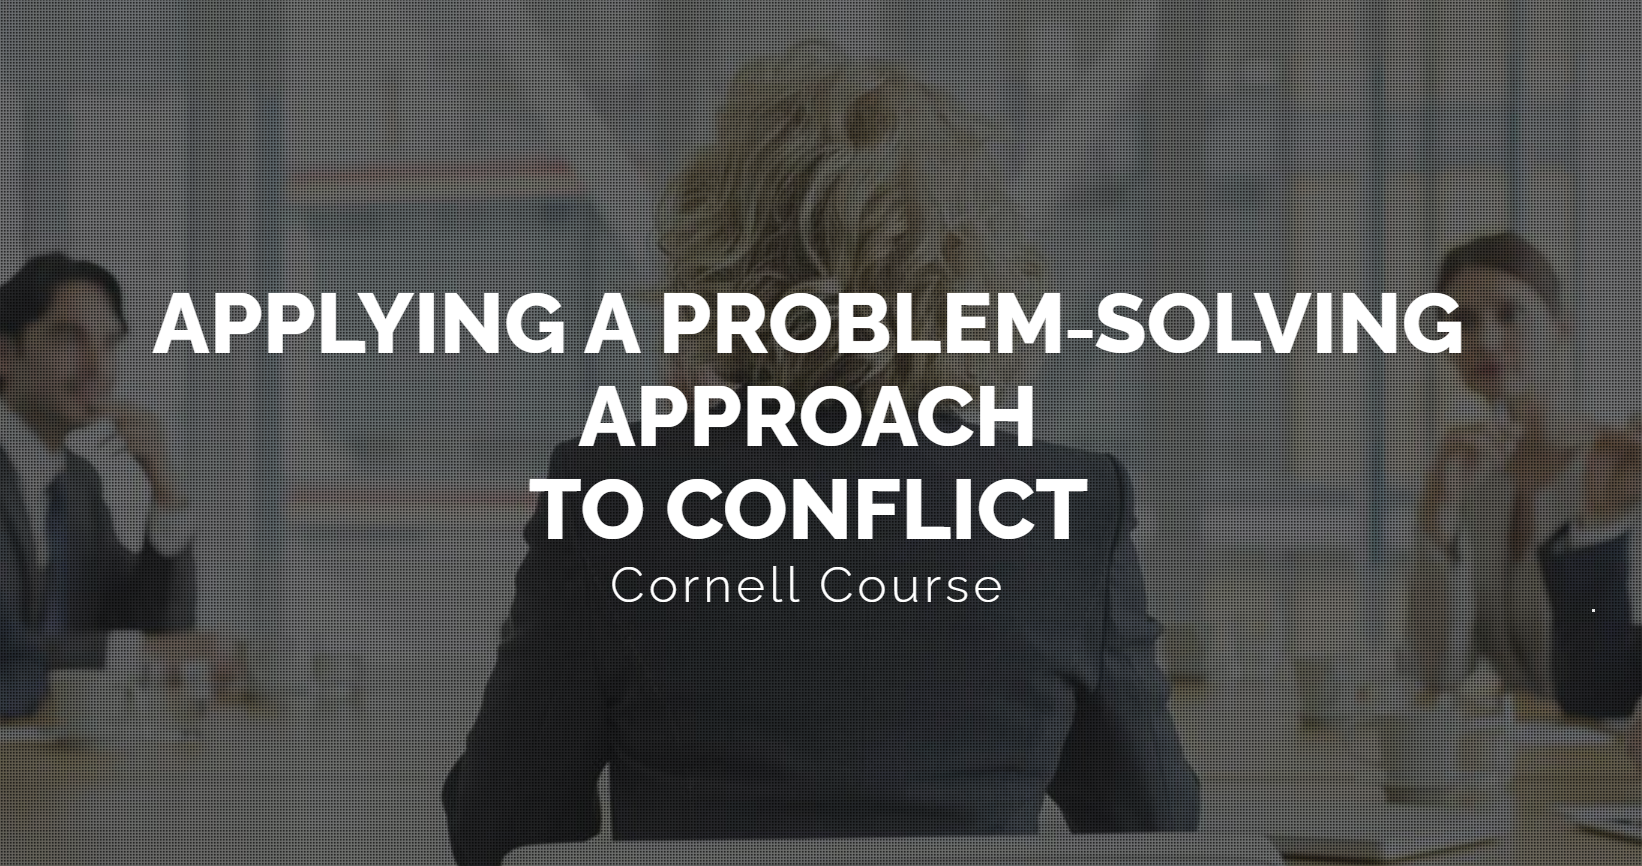 Applying a Problem Solving Approach to Conflict